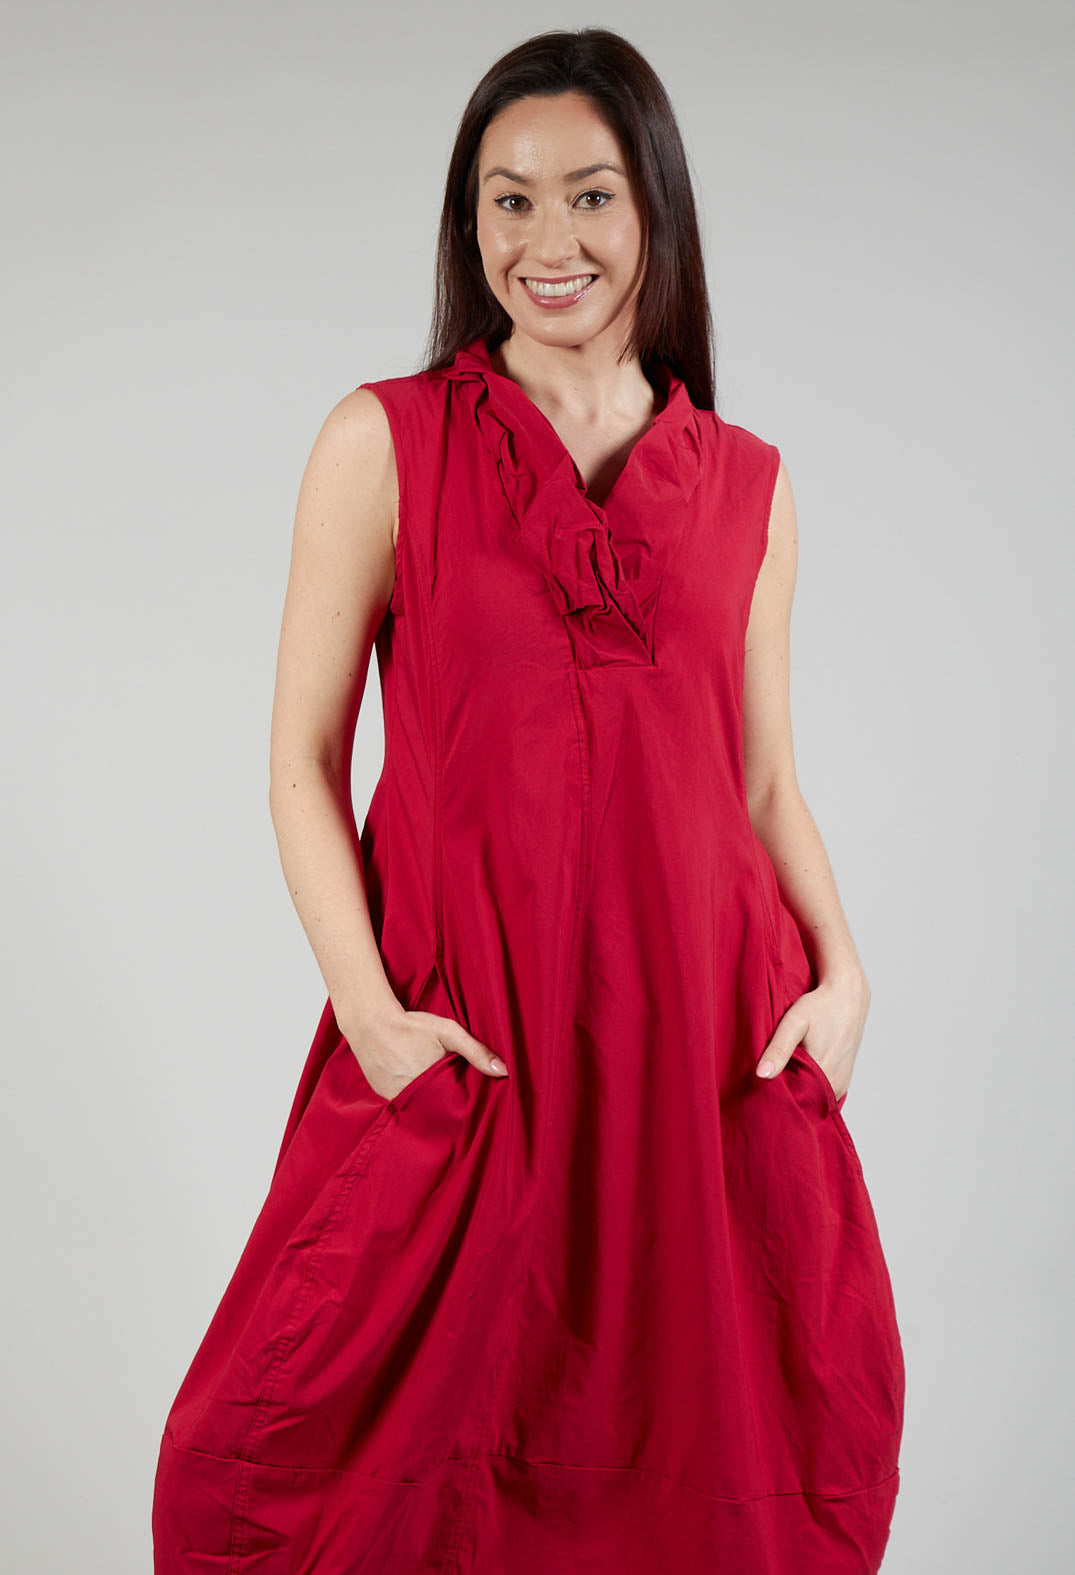 Sleeveless Dress with Feature Neckline in Chili